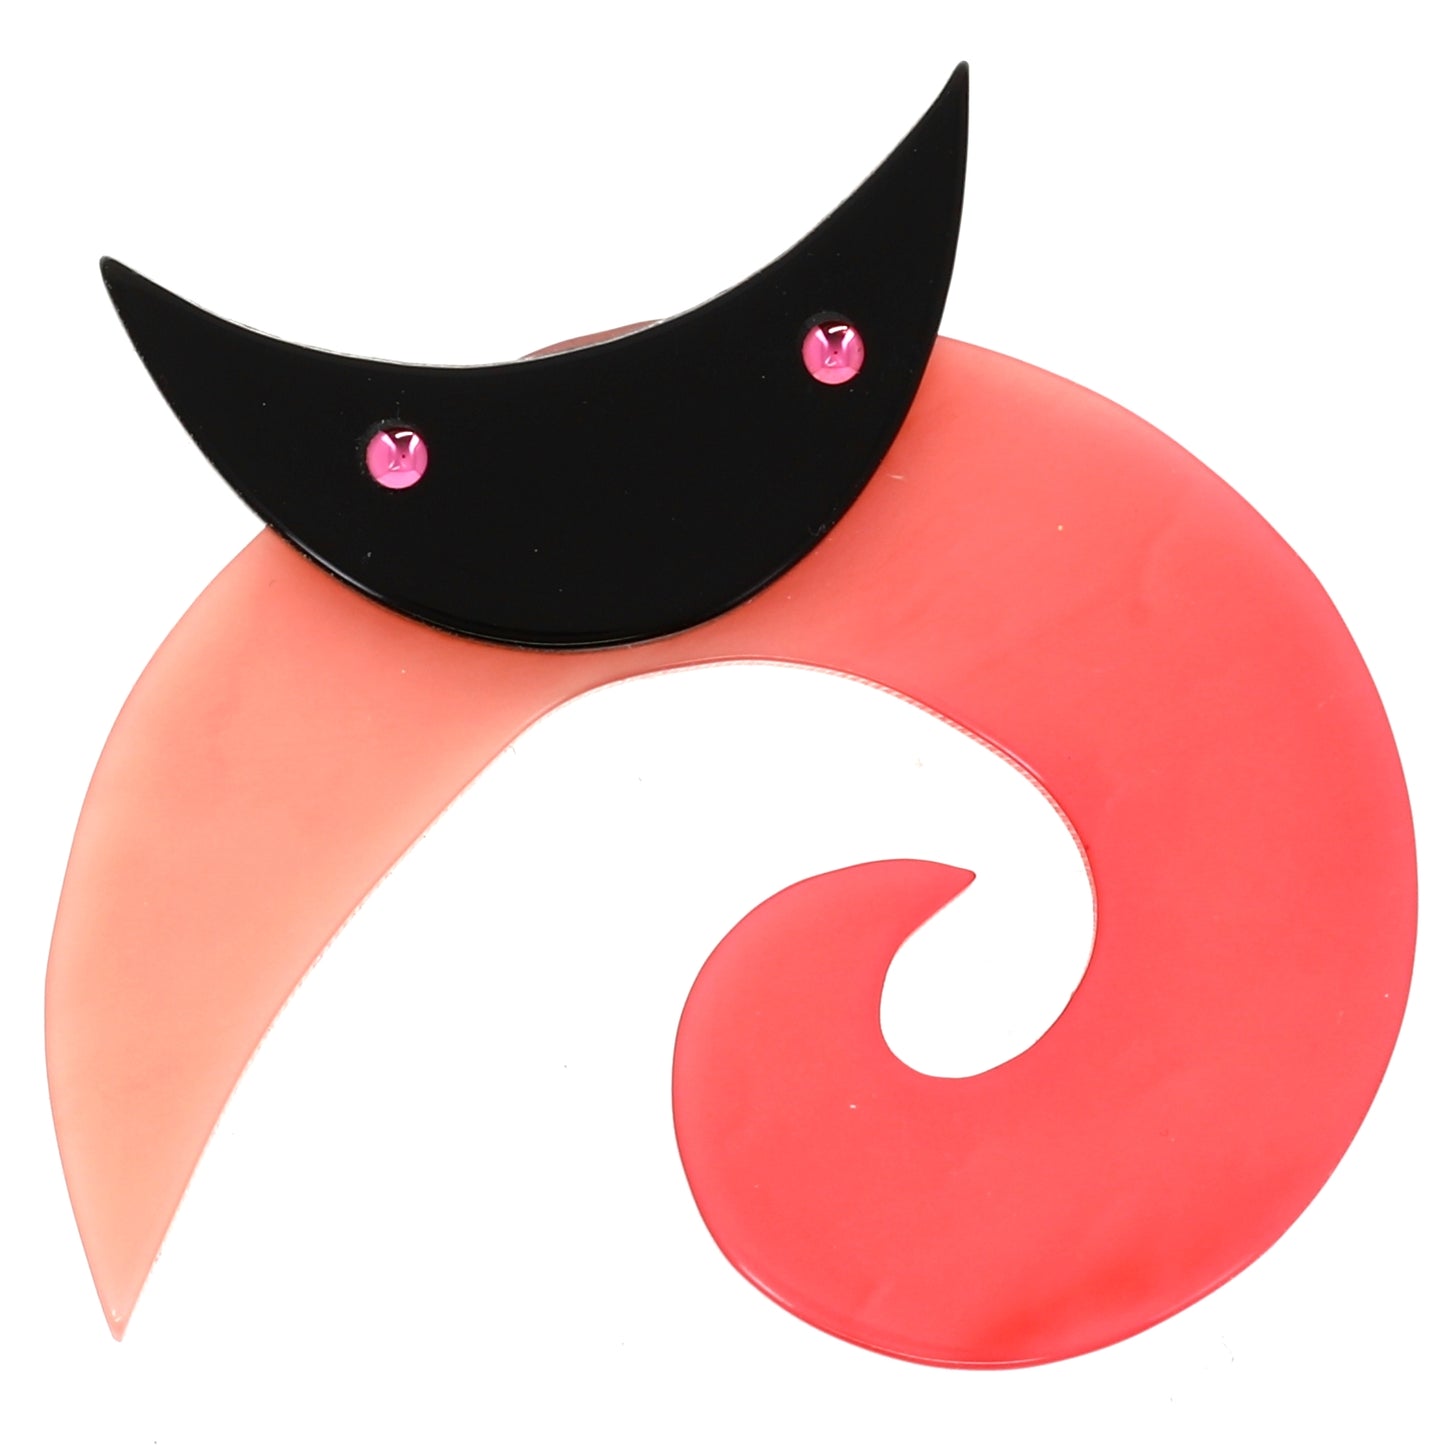 Pink Spirale Cat Brooch in galalith